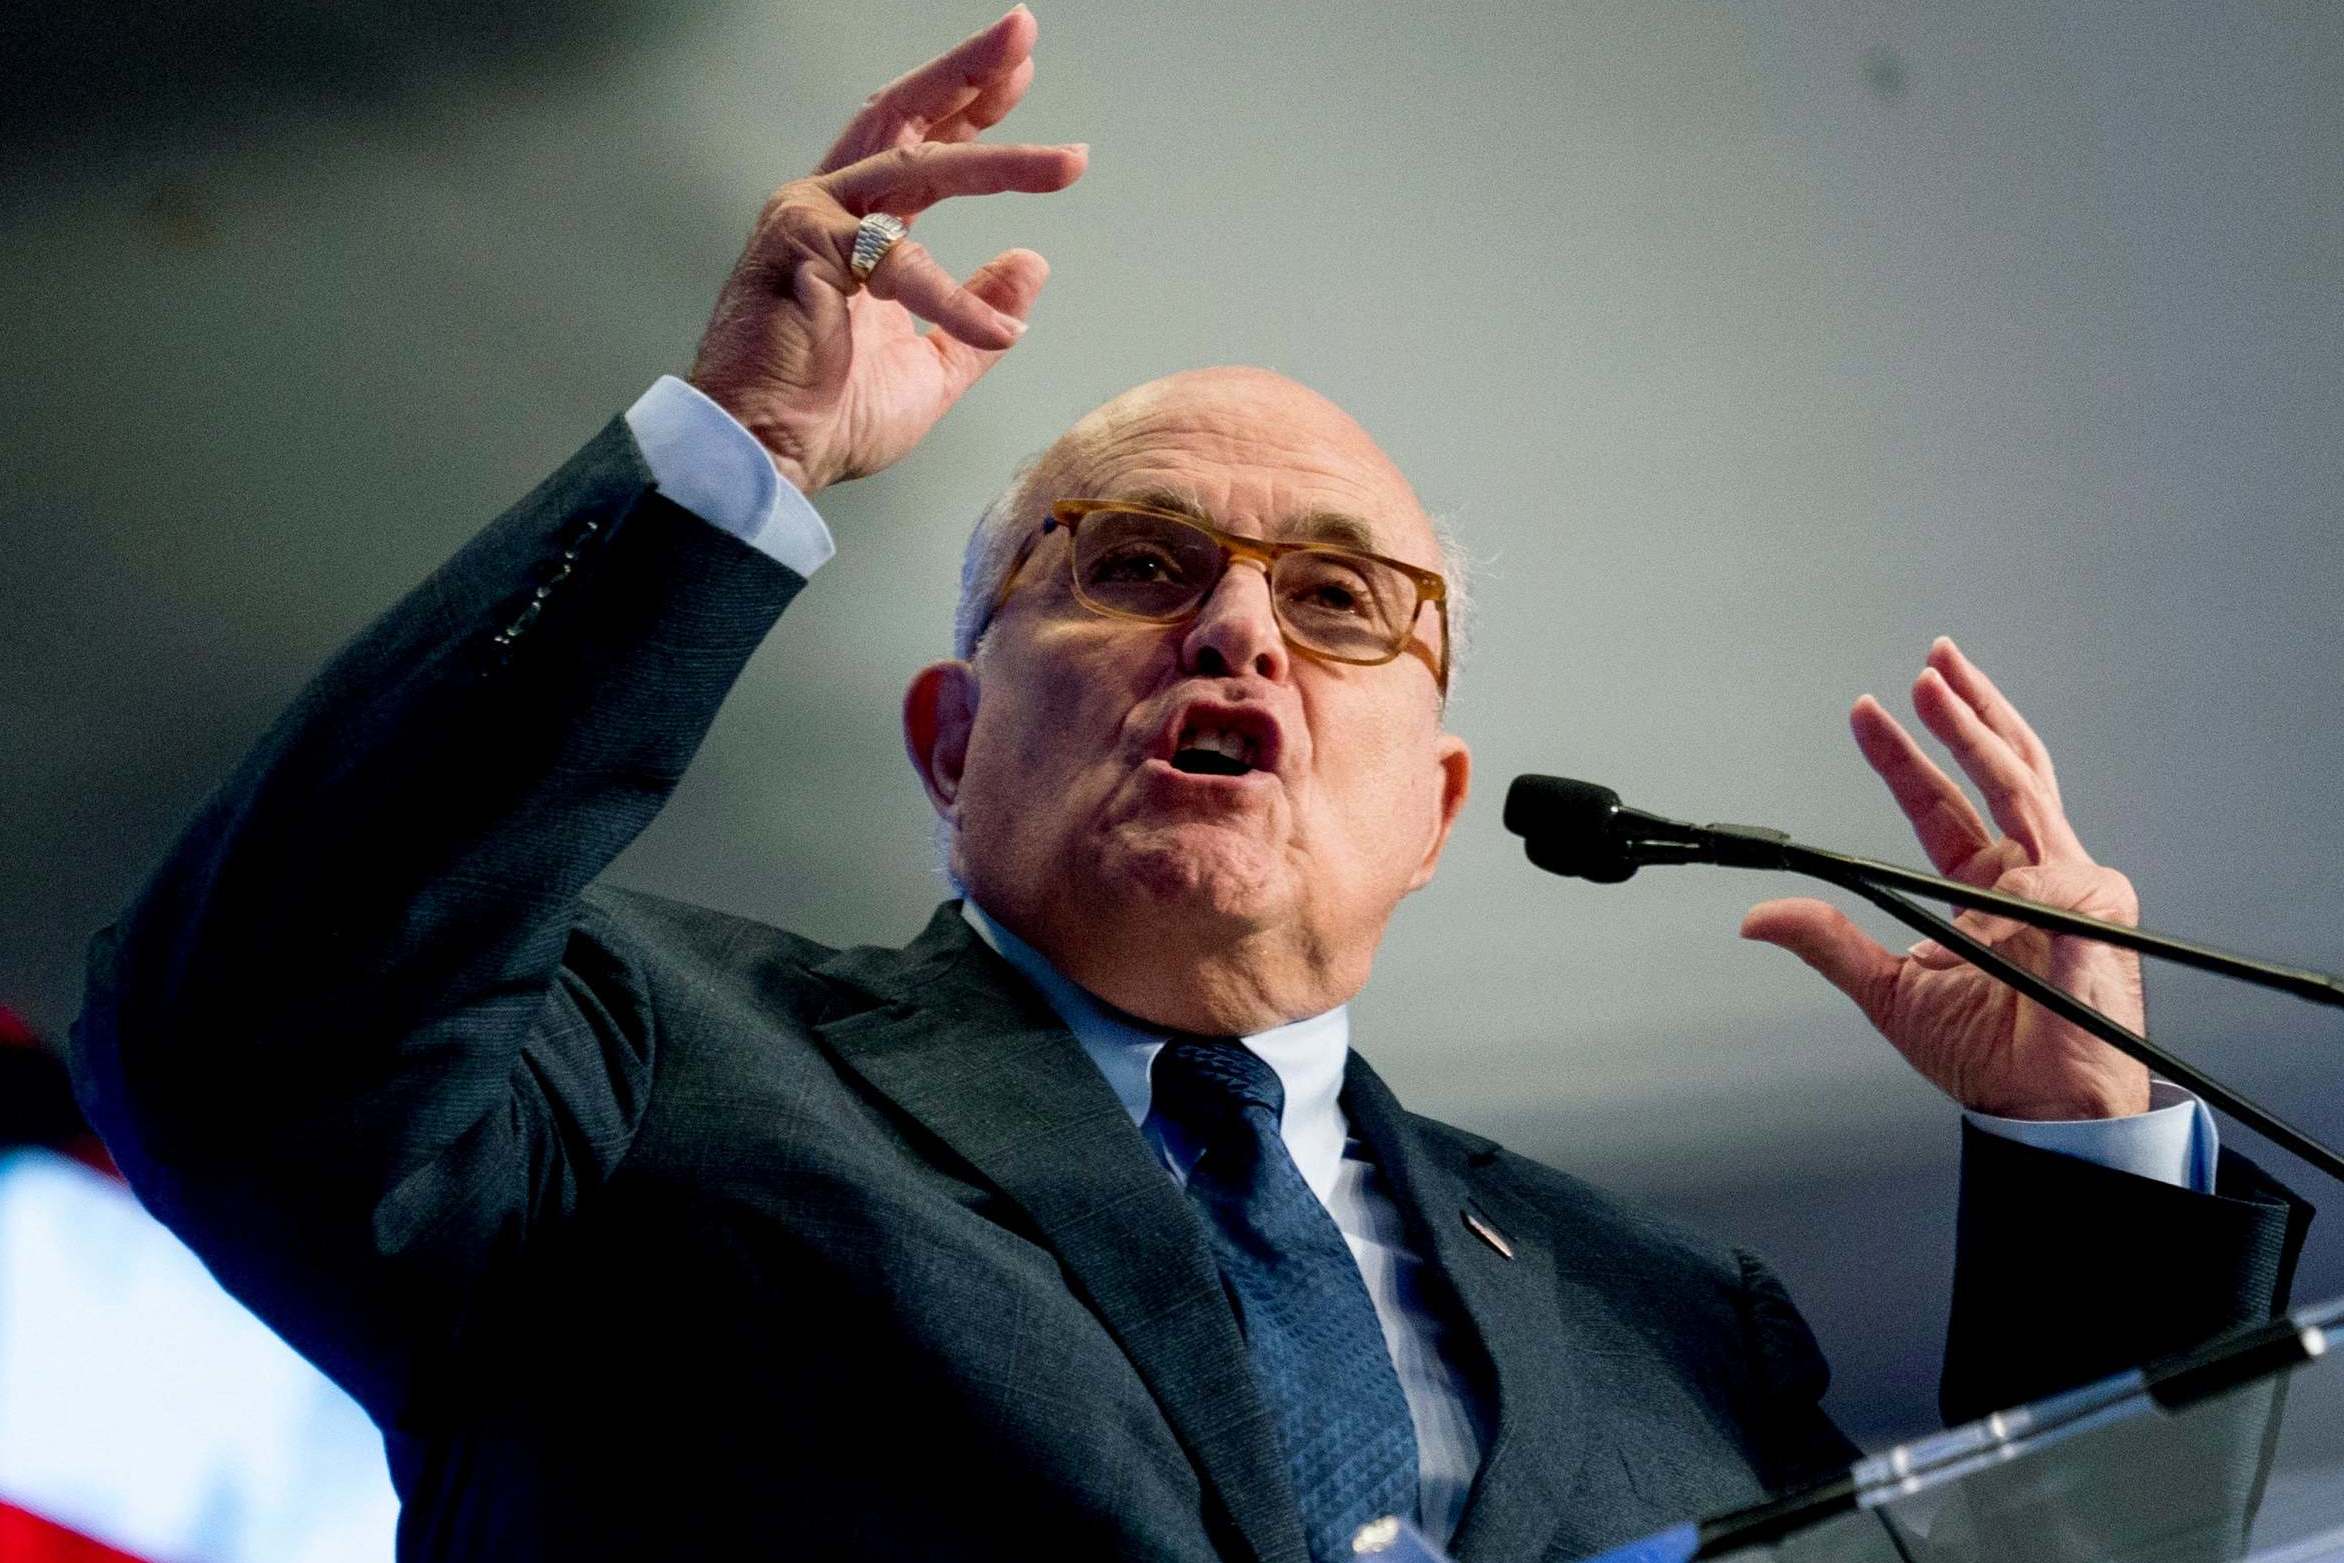 Rudy Giuliani: Trump lawyer immediately contradicts himself after claiming he would not cooperate with impeachment investigation